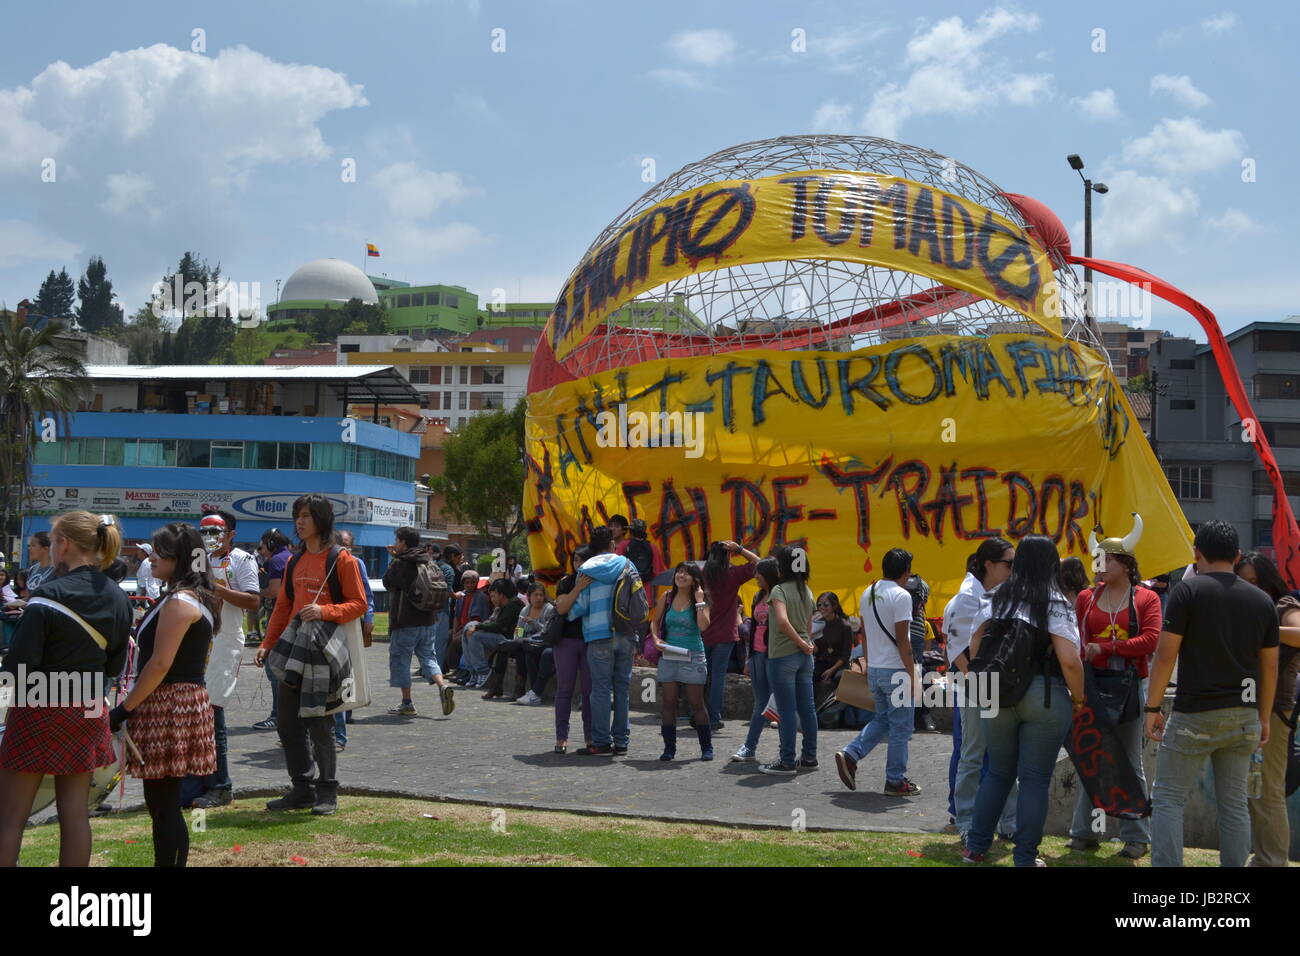 QUITO, ECUADOR - JANUARY 28, 2016: An unidentified people in quito ecuador, march protesters in an anti bullfightting in an arbolito park. Stock Photo